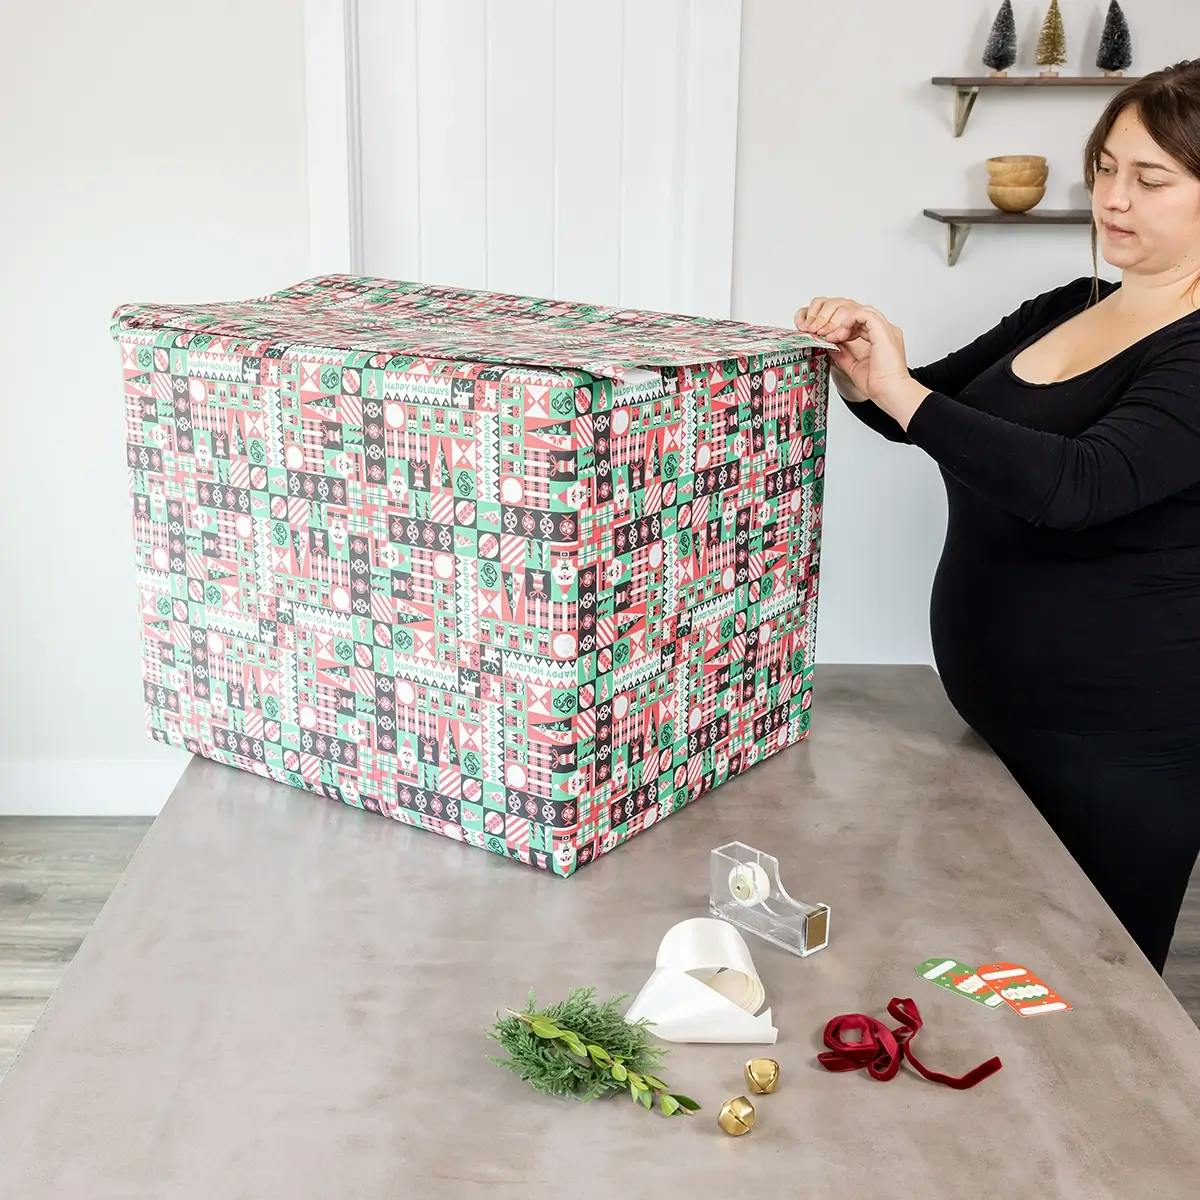 Covering a large box with wrapping paper.